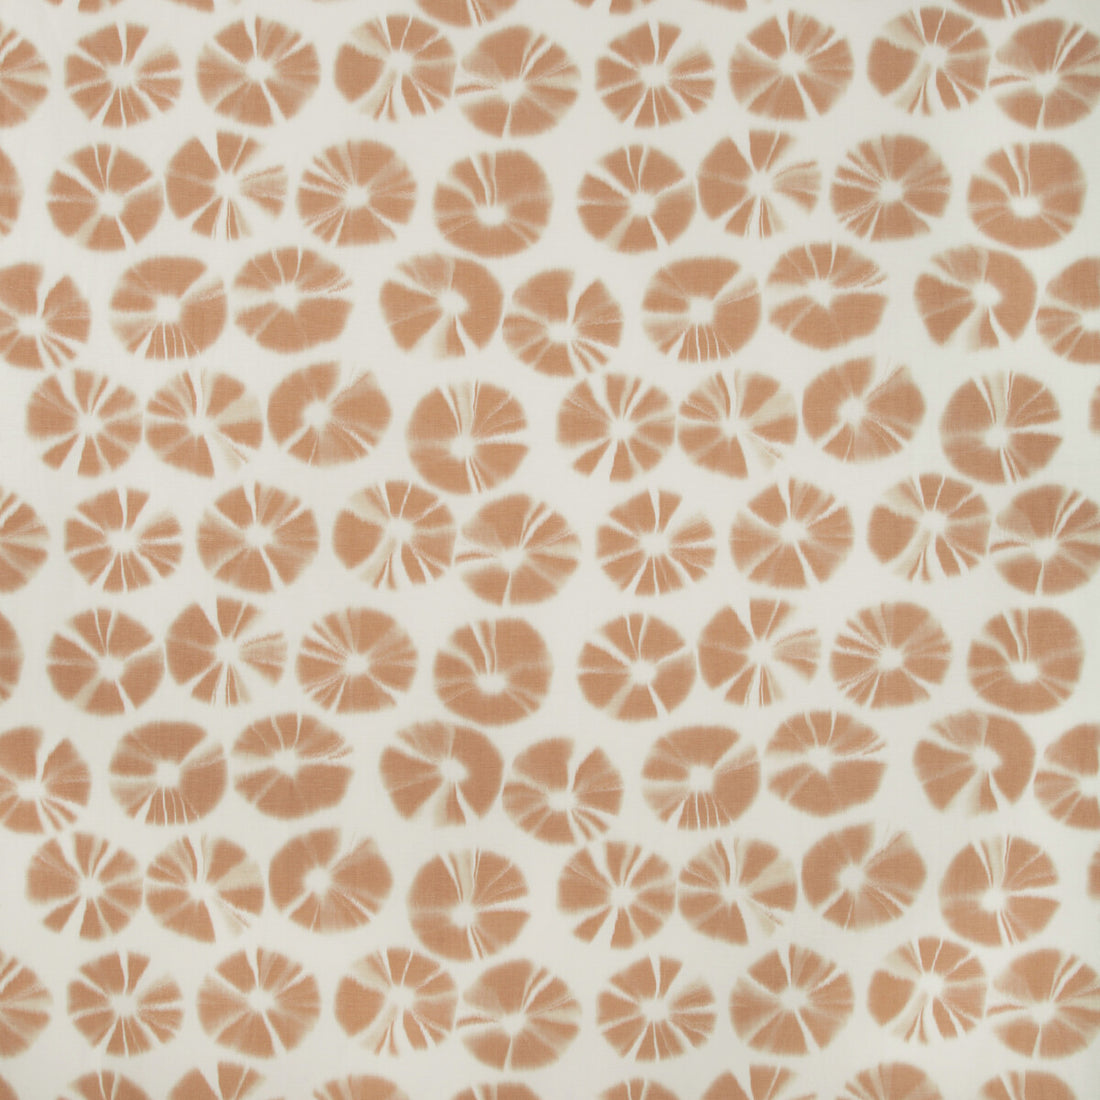 Echino fabric in clay color - pattern ECHINO.12.0 - by Kravet Couture in the Terrae Prints collection